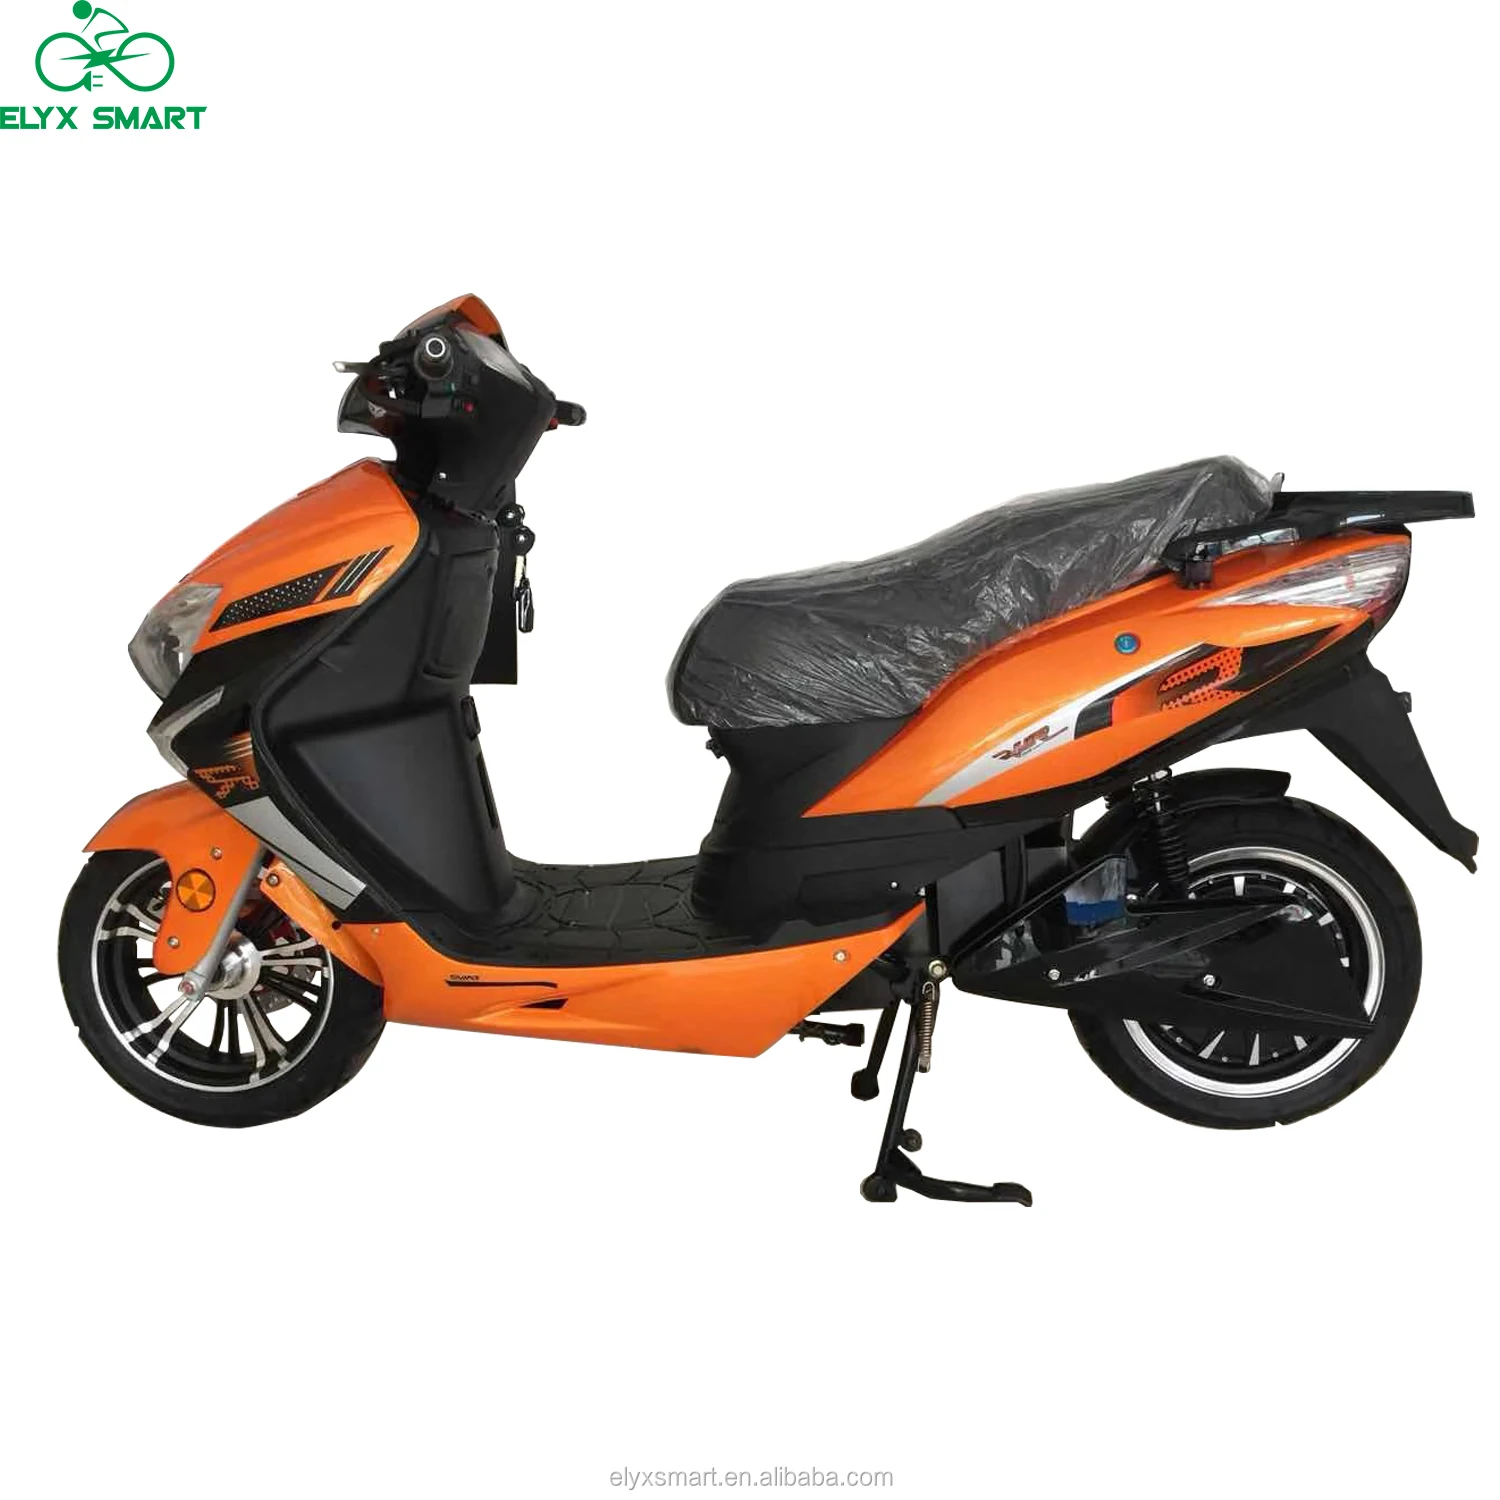 Elyx Smart 2020 Big Power Motorcycles 68KM/H OEM Factory Fast Delivery Moto Electrica Off Road Electric Scooter 72V > 2000W F1-3